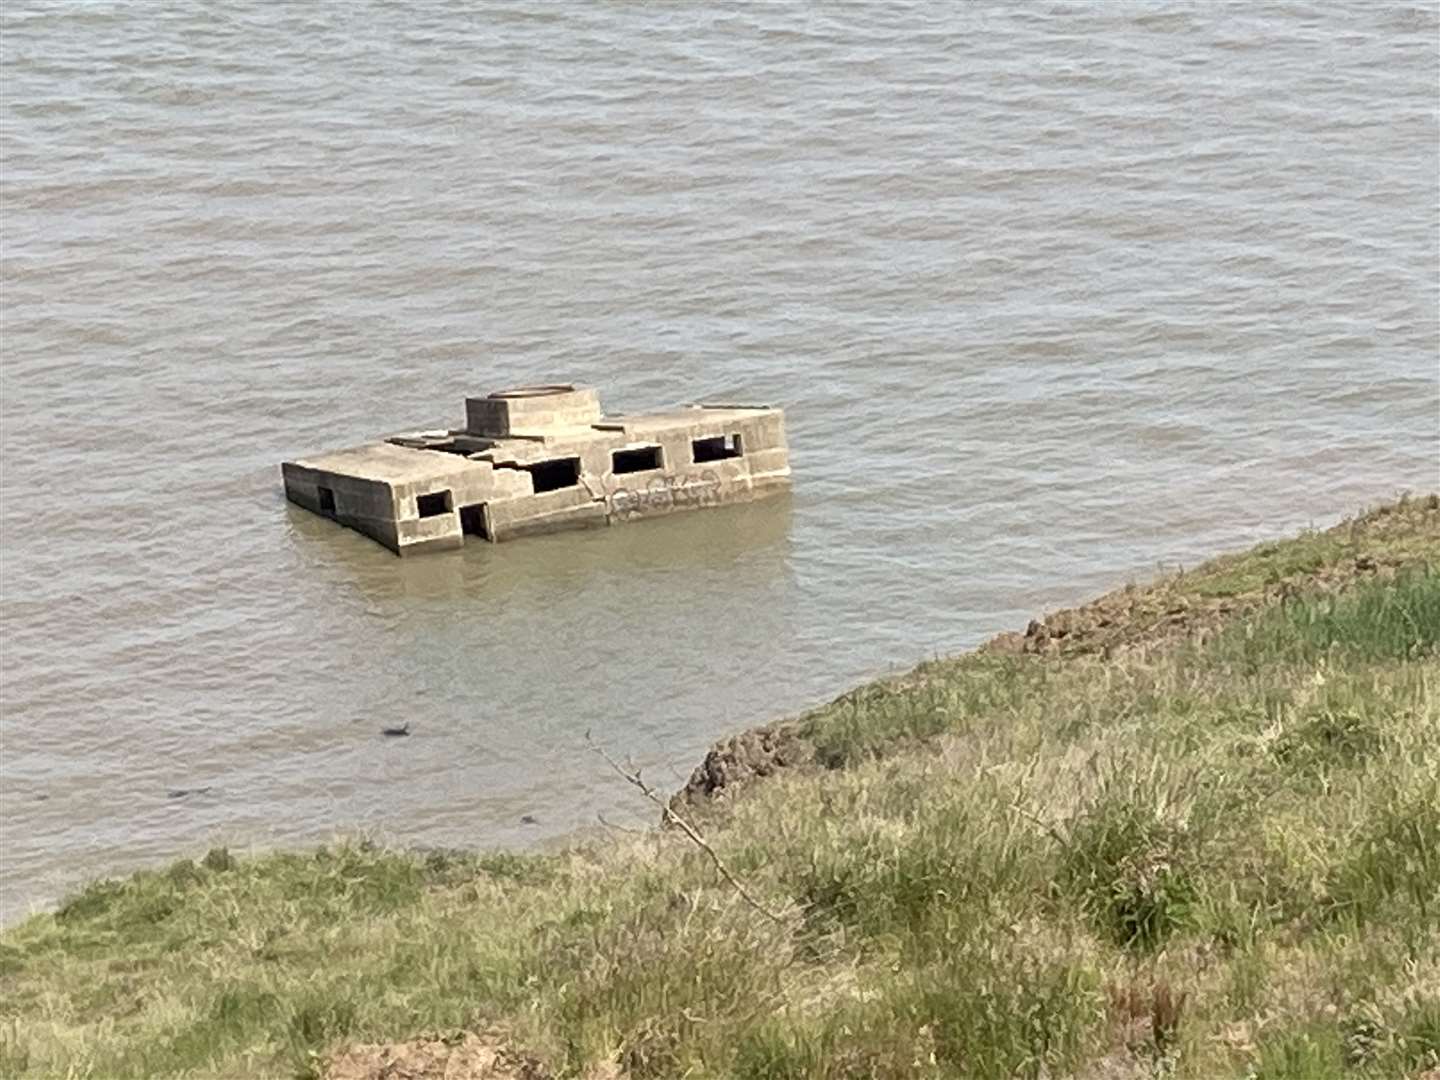 Former Second World War defences surrounded by high tide at Warden cliffs, Sheppey, illustrating the dangers of the coast